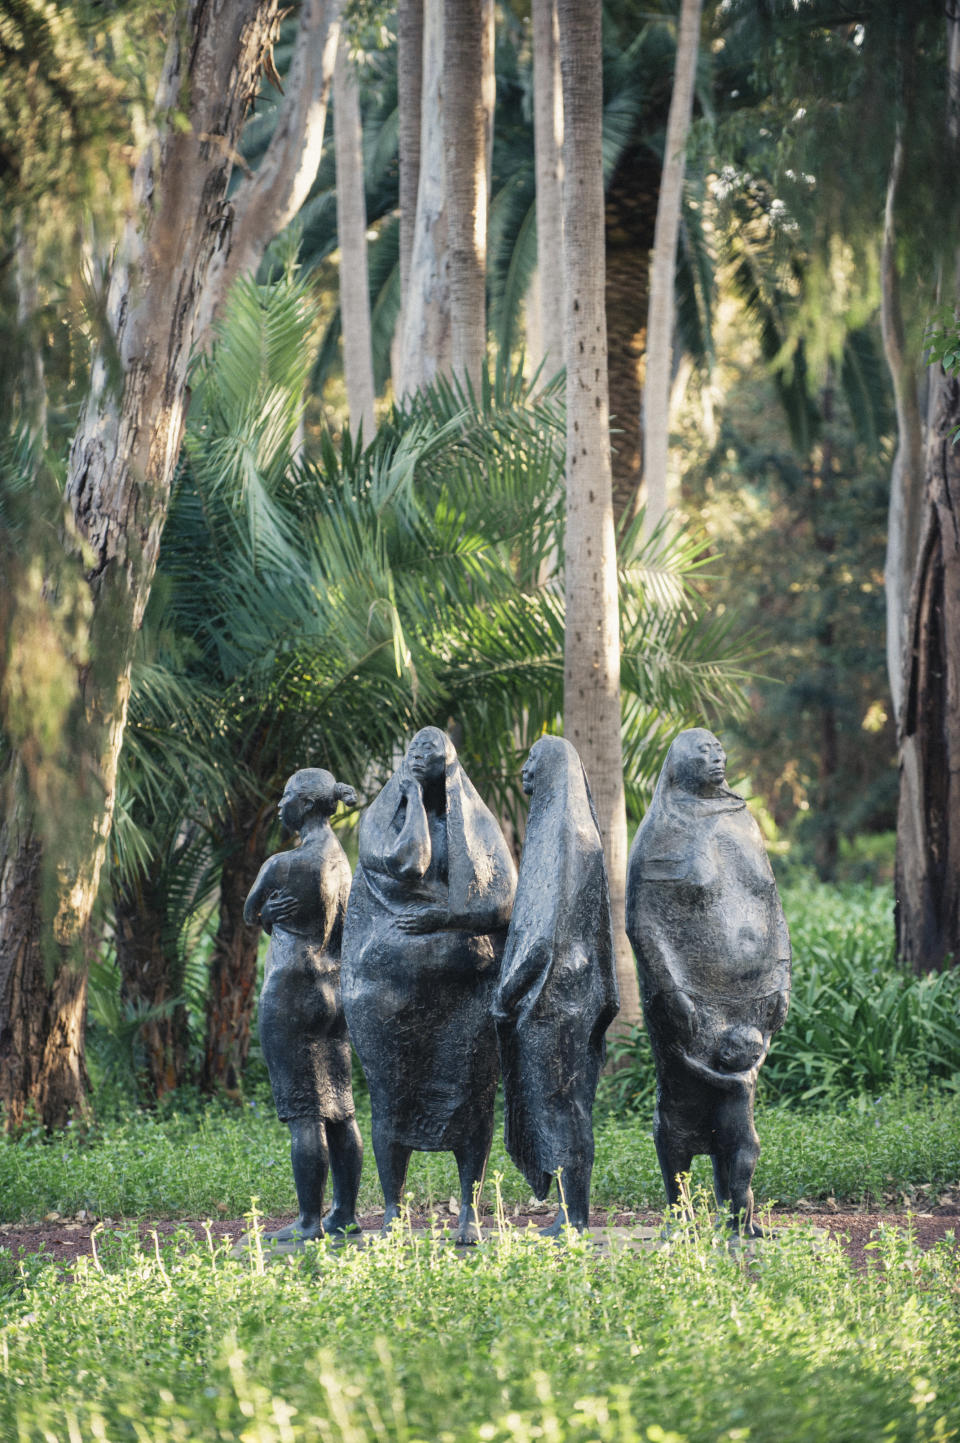 This sculpture, Grupo de quatro mujeres de pie, by Fransisco Zuniga stopped me in my tracks. Placed in a corner of the property, the women gather beneath large eucalyptus, palms and pine trees. The four peasant women symbolize the different stages of life: adolescence, pregnancy, middle age and old age. Zuniga brings bronze to life, as the women stand proudly and powerfully.